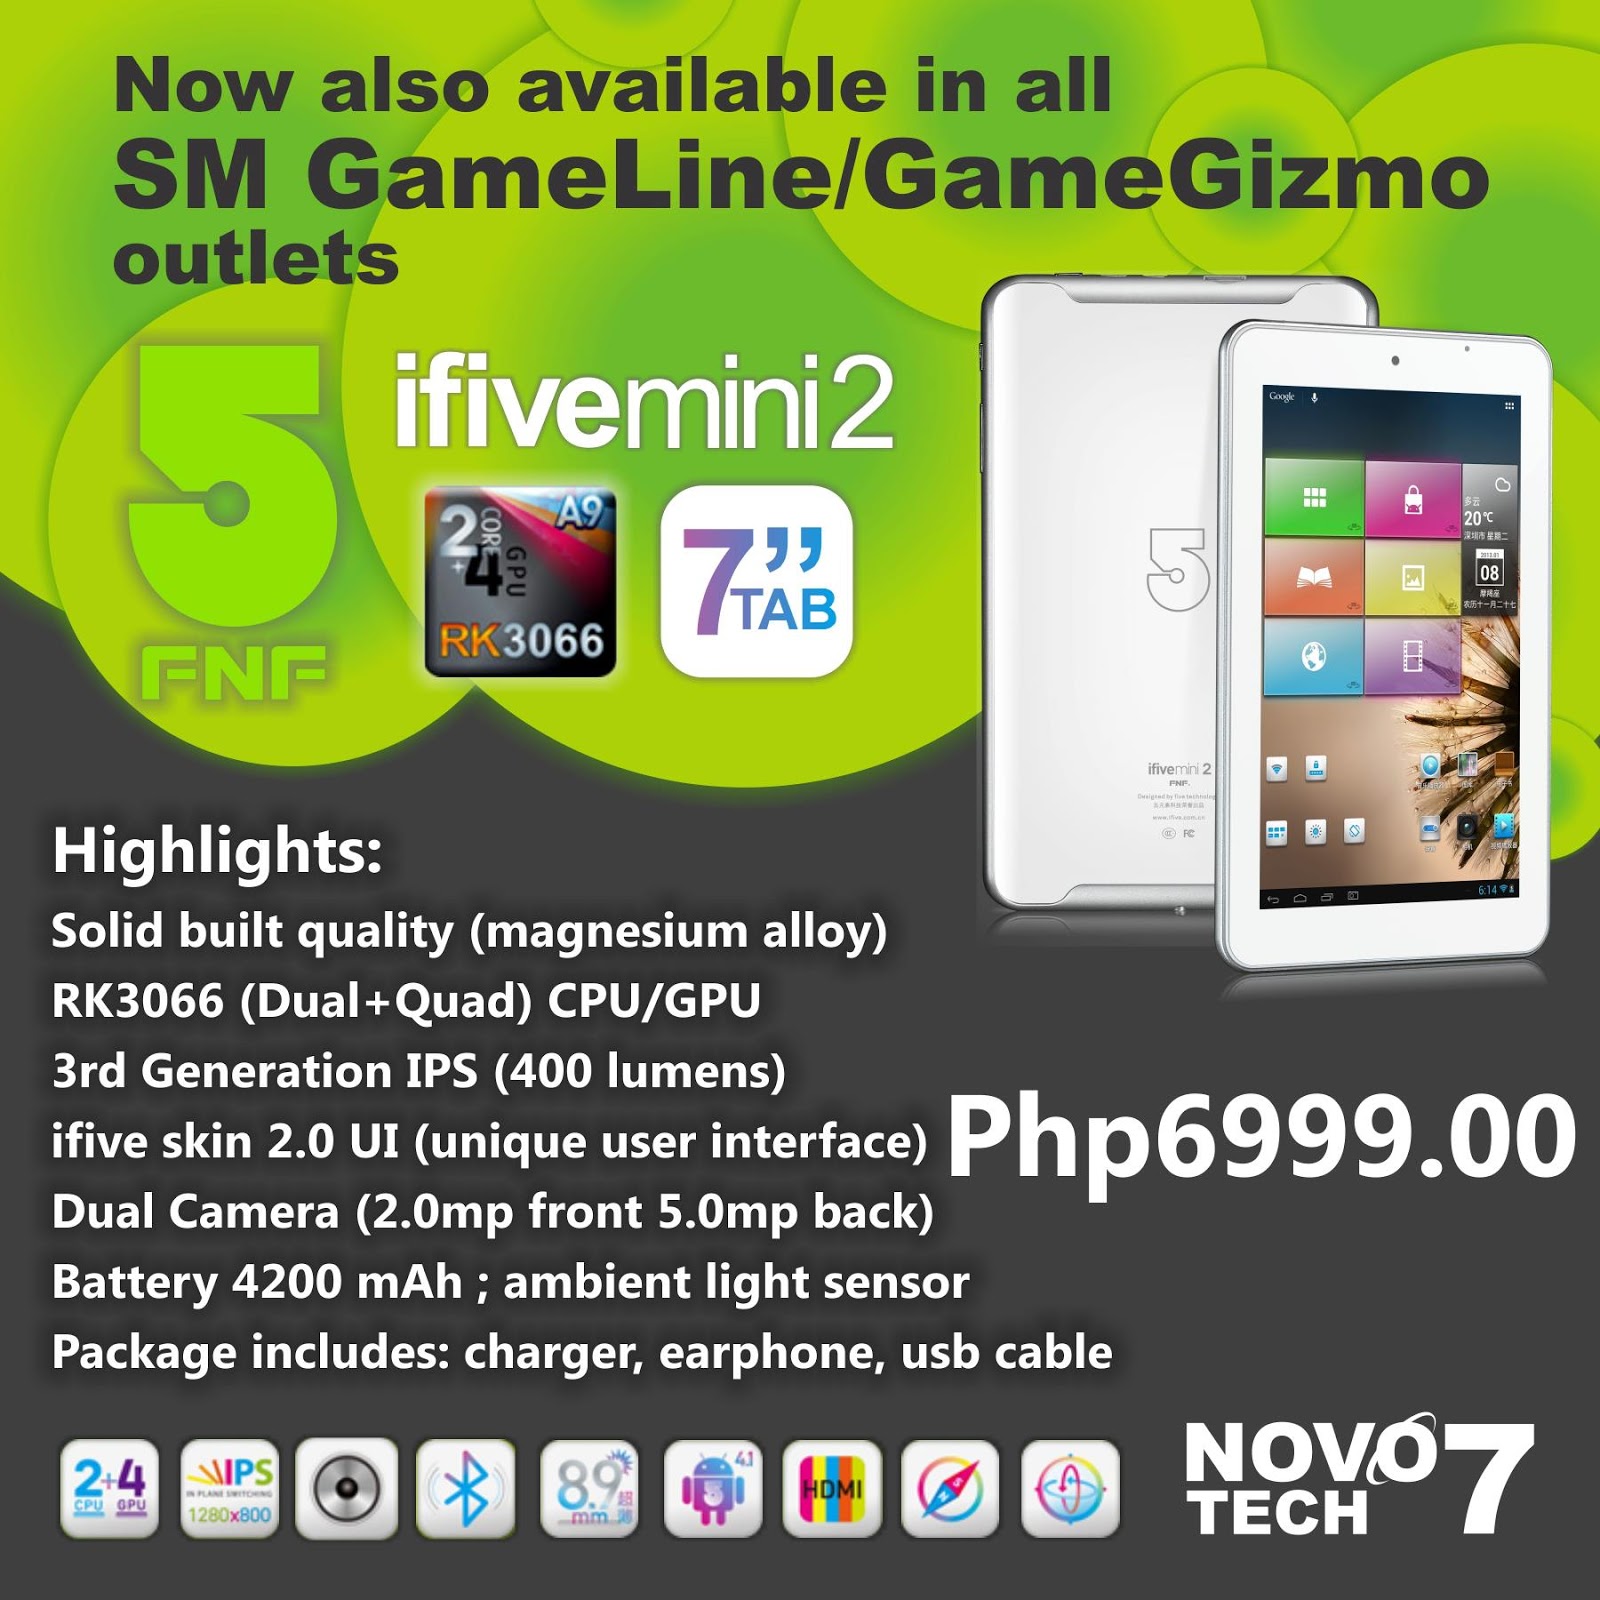 iFive Mini 2, a 7-inch Rockchip Dual-Core Android Tablet for just